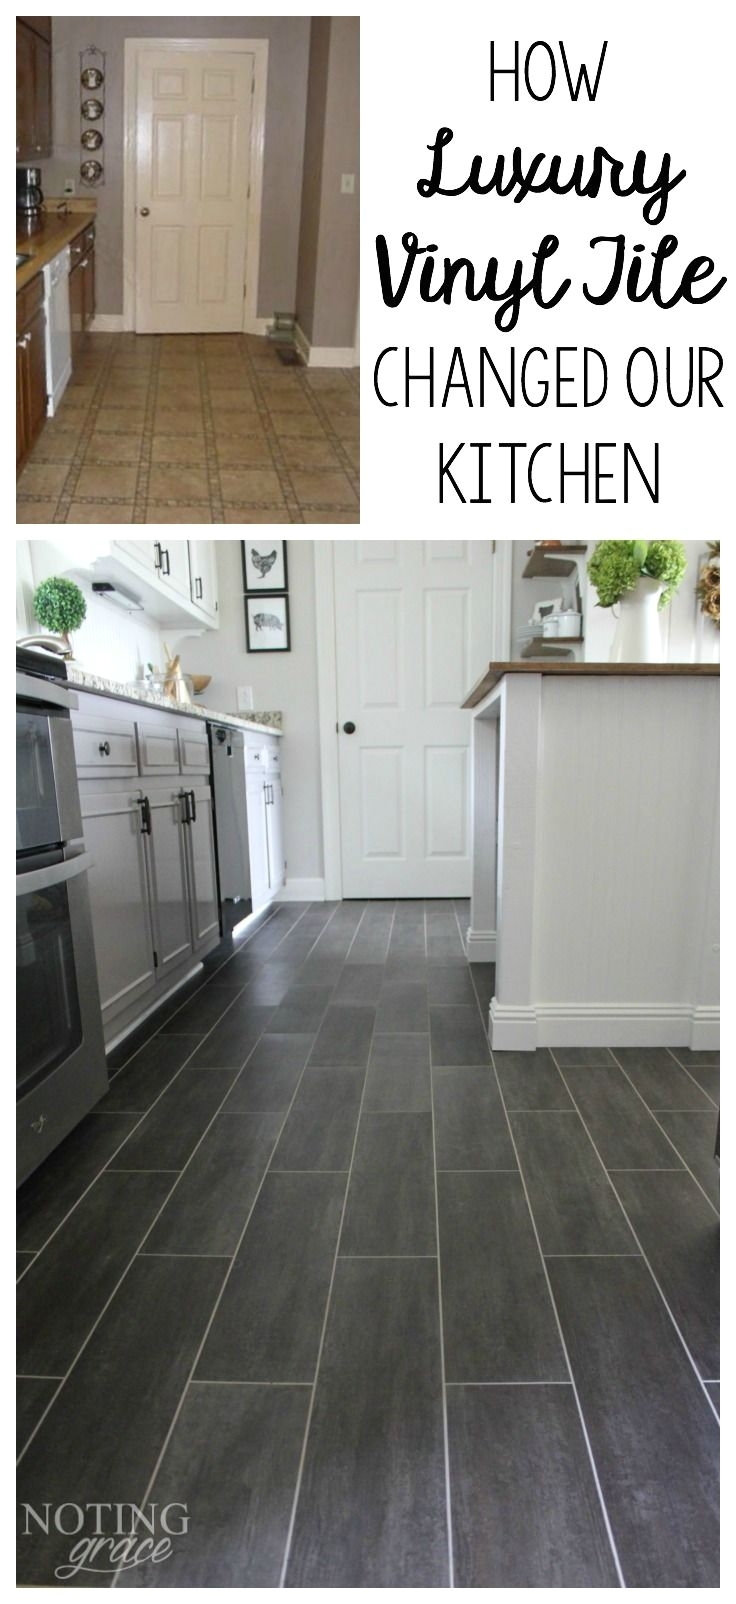 it took only 3 days and 400 to completely transform our kitchen with diy flooring groutable luxury vinyl tile